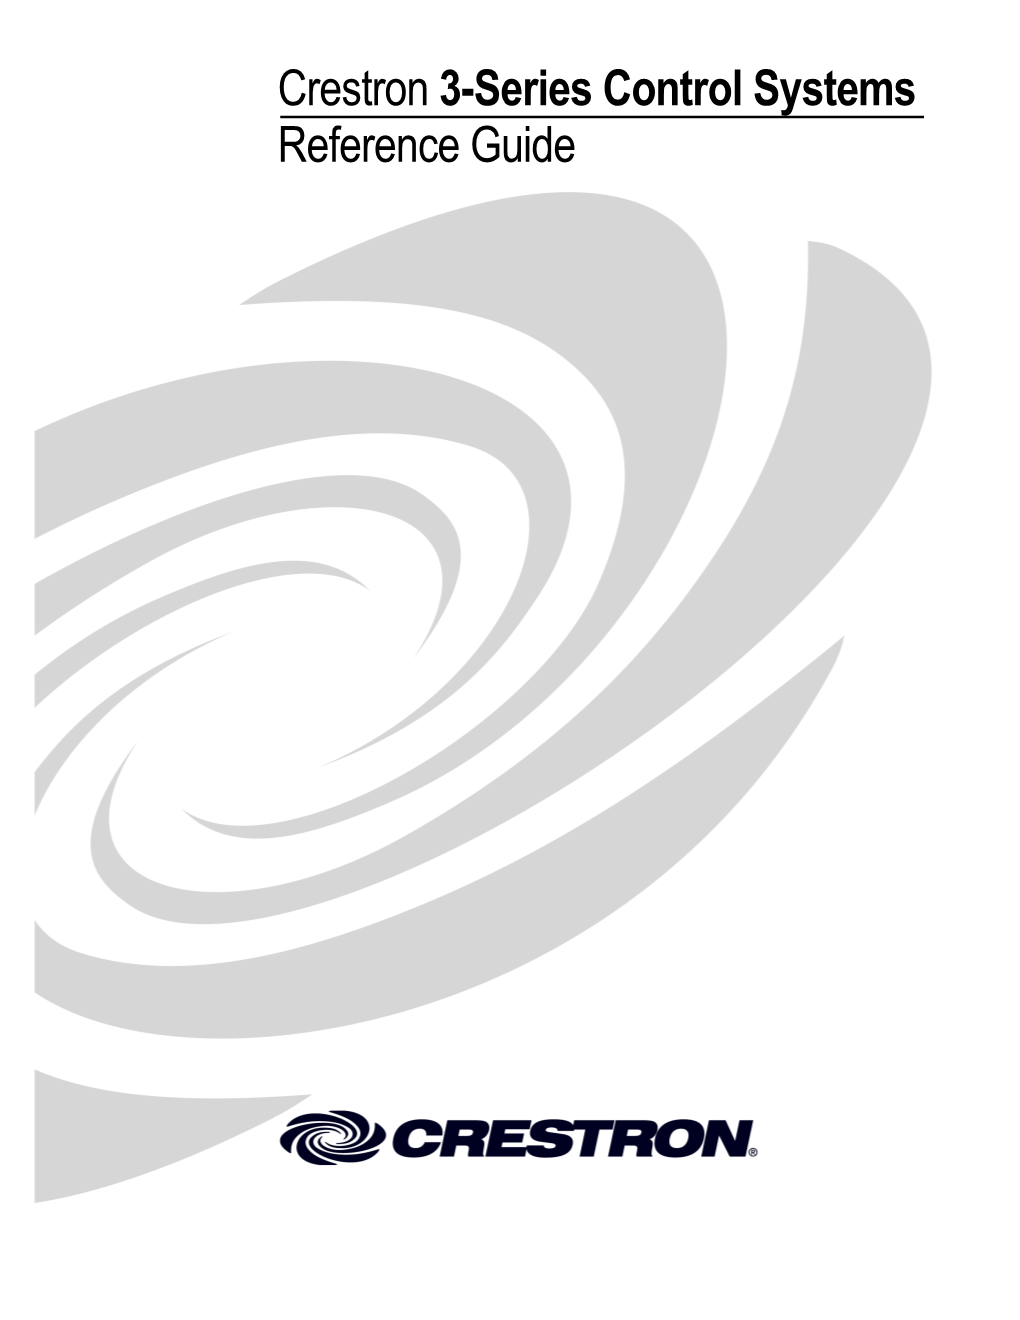 Crestron 3-Series Control Systems Reference Guide